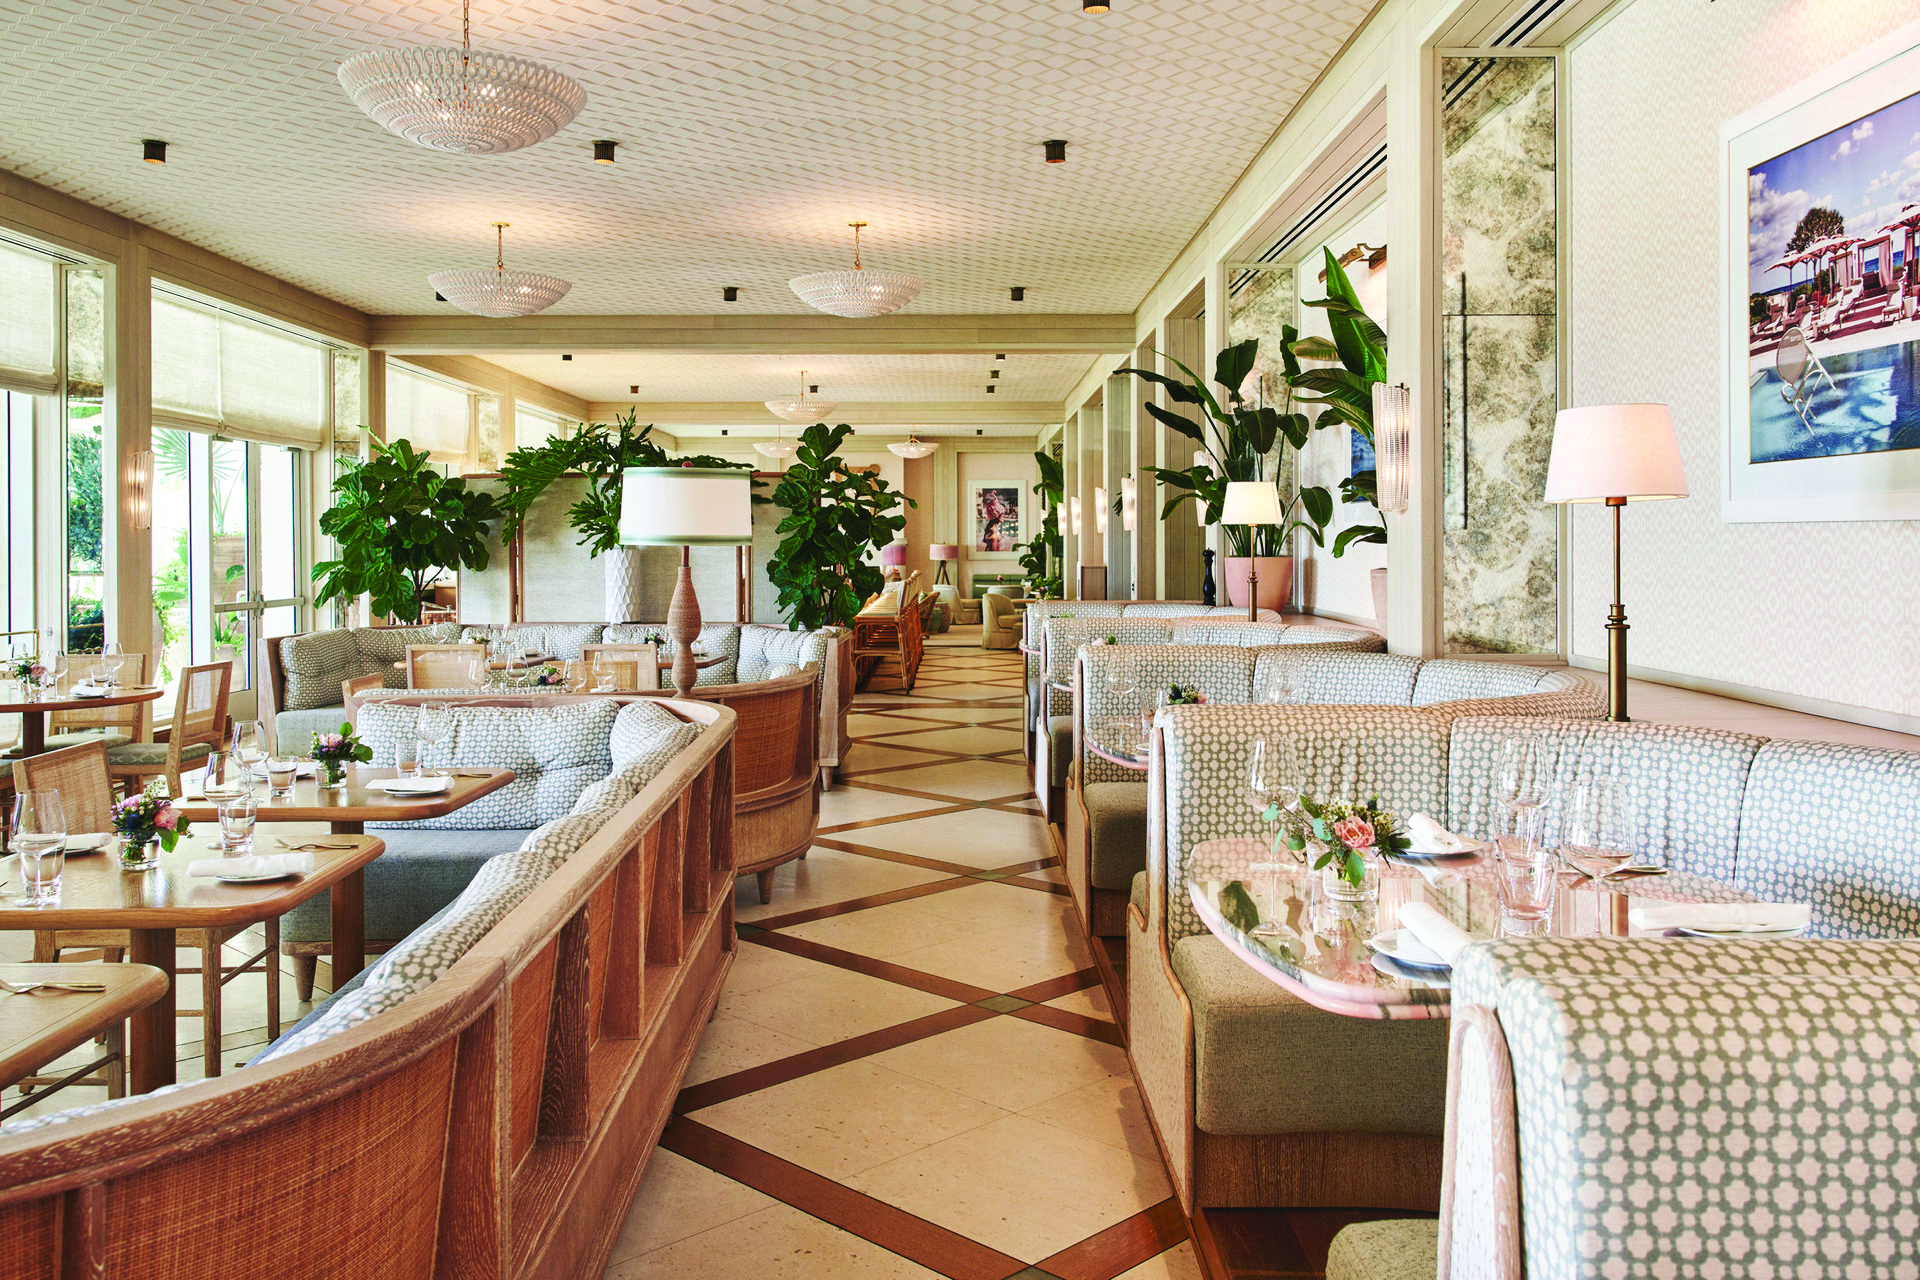 Florie’s, chef Mauro Colagreco’s restaurant at Four Seasons Palm Beach